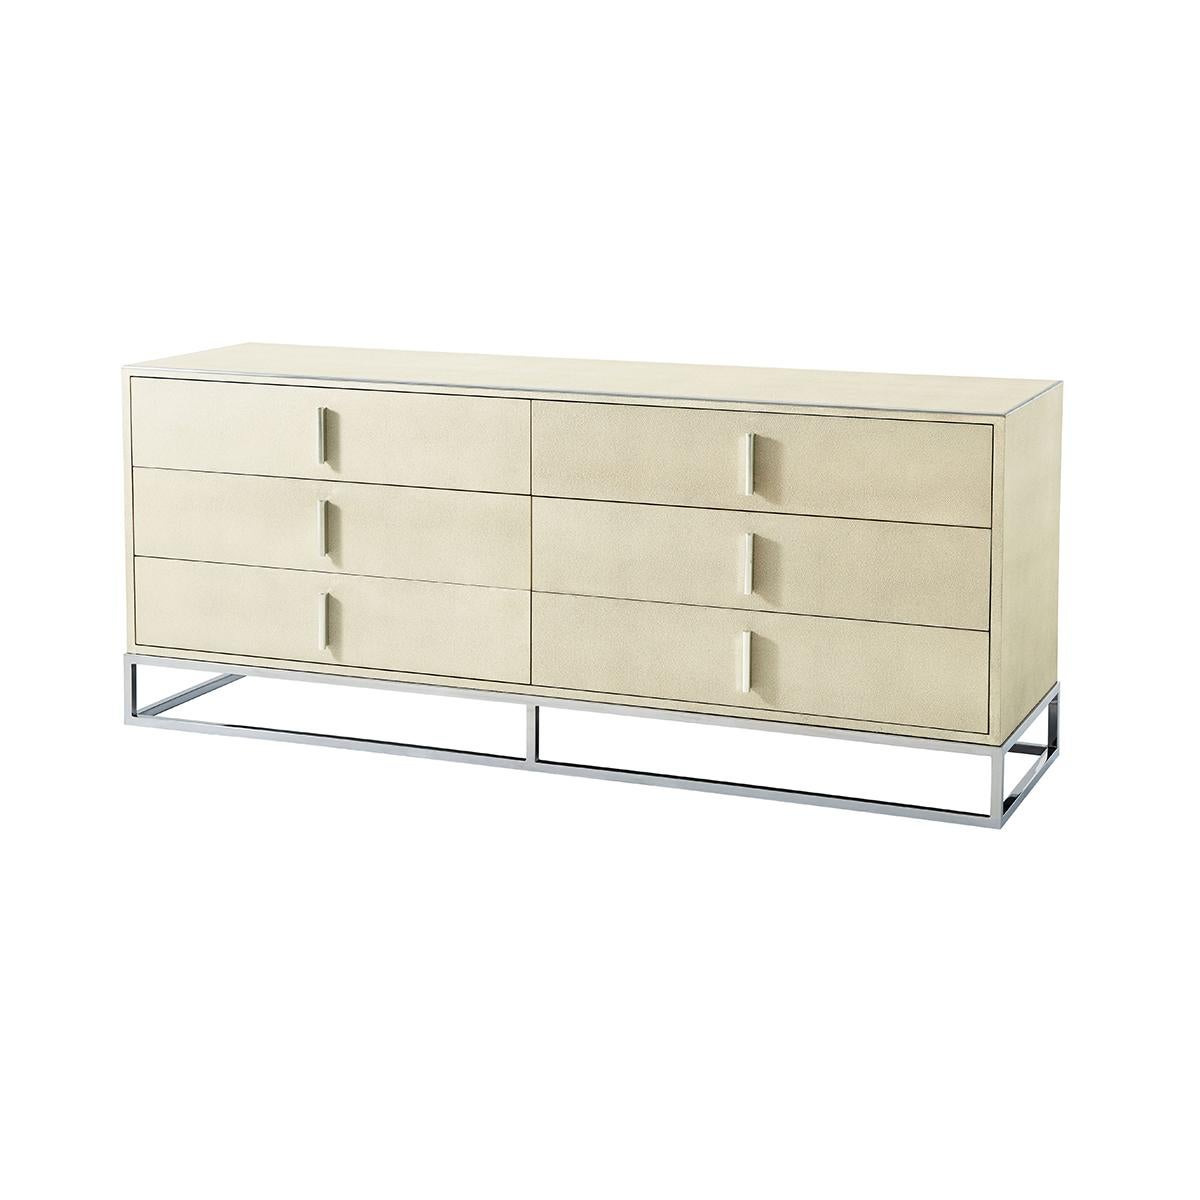 A wonderful collection of modern leather-wrapped bedroom furniture. It consists of a long six-drawer dresser and two low two-drawer nightstands. With polished nickel finish hardware and trim, all raised on a cube form polished nickel base.

Dresser